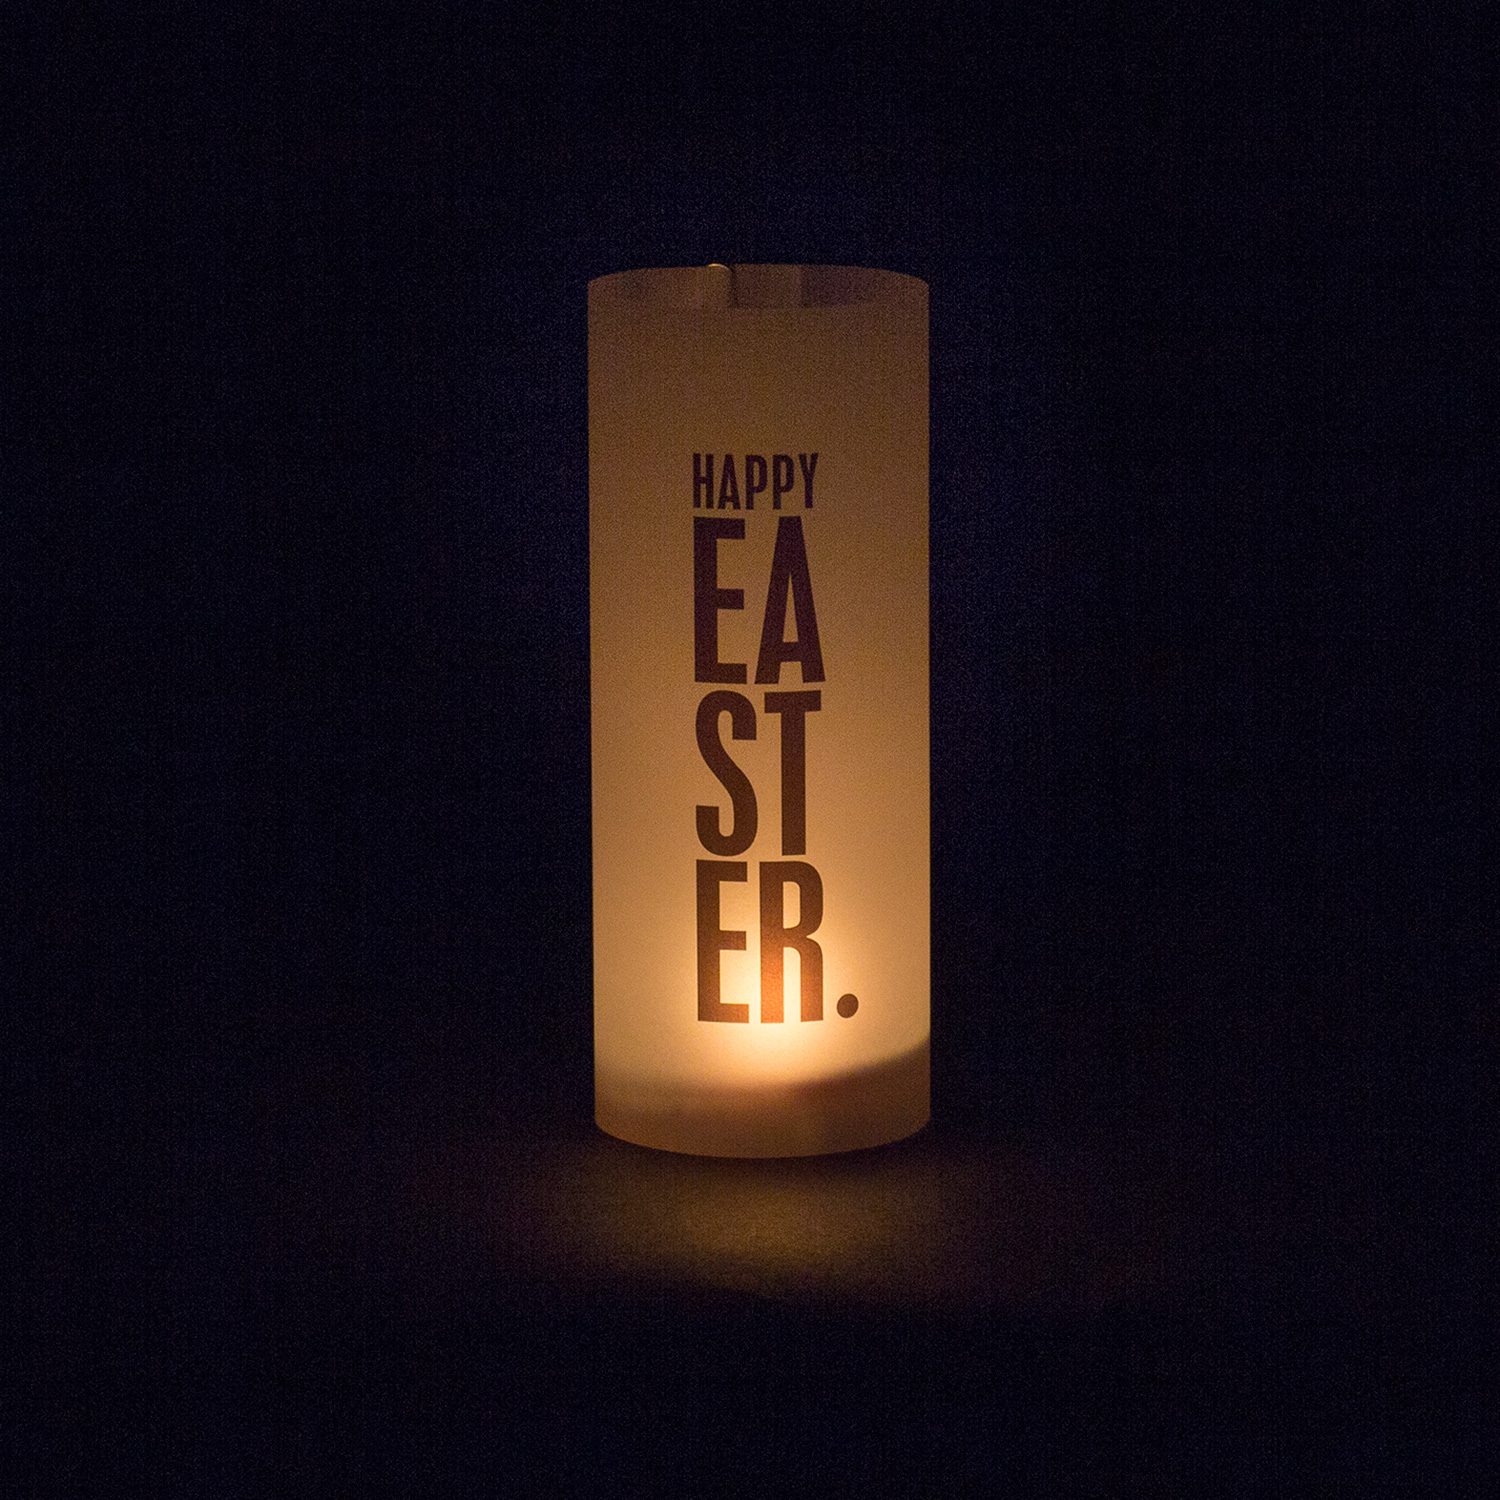 Paper Light Shade "Easter" - The Special One